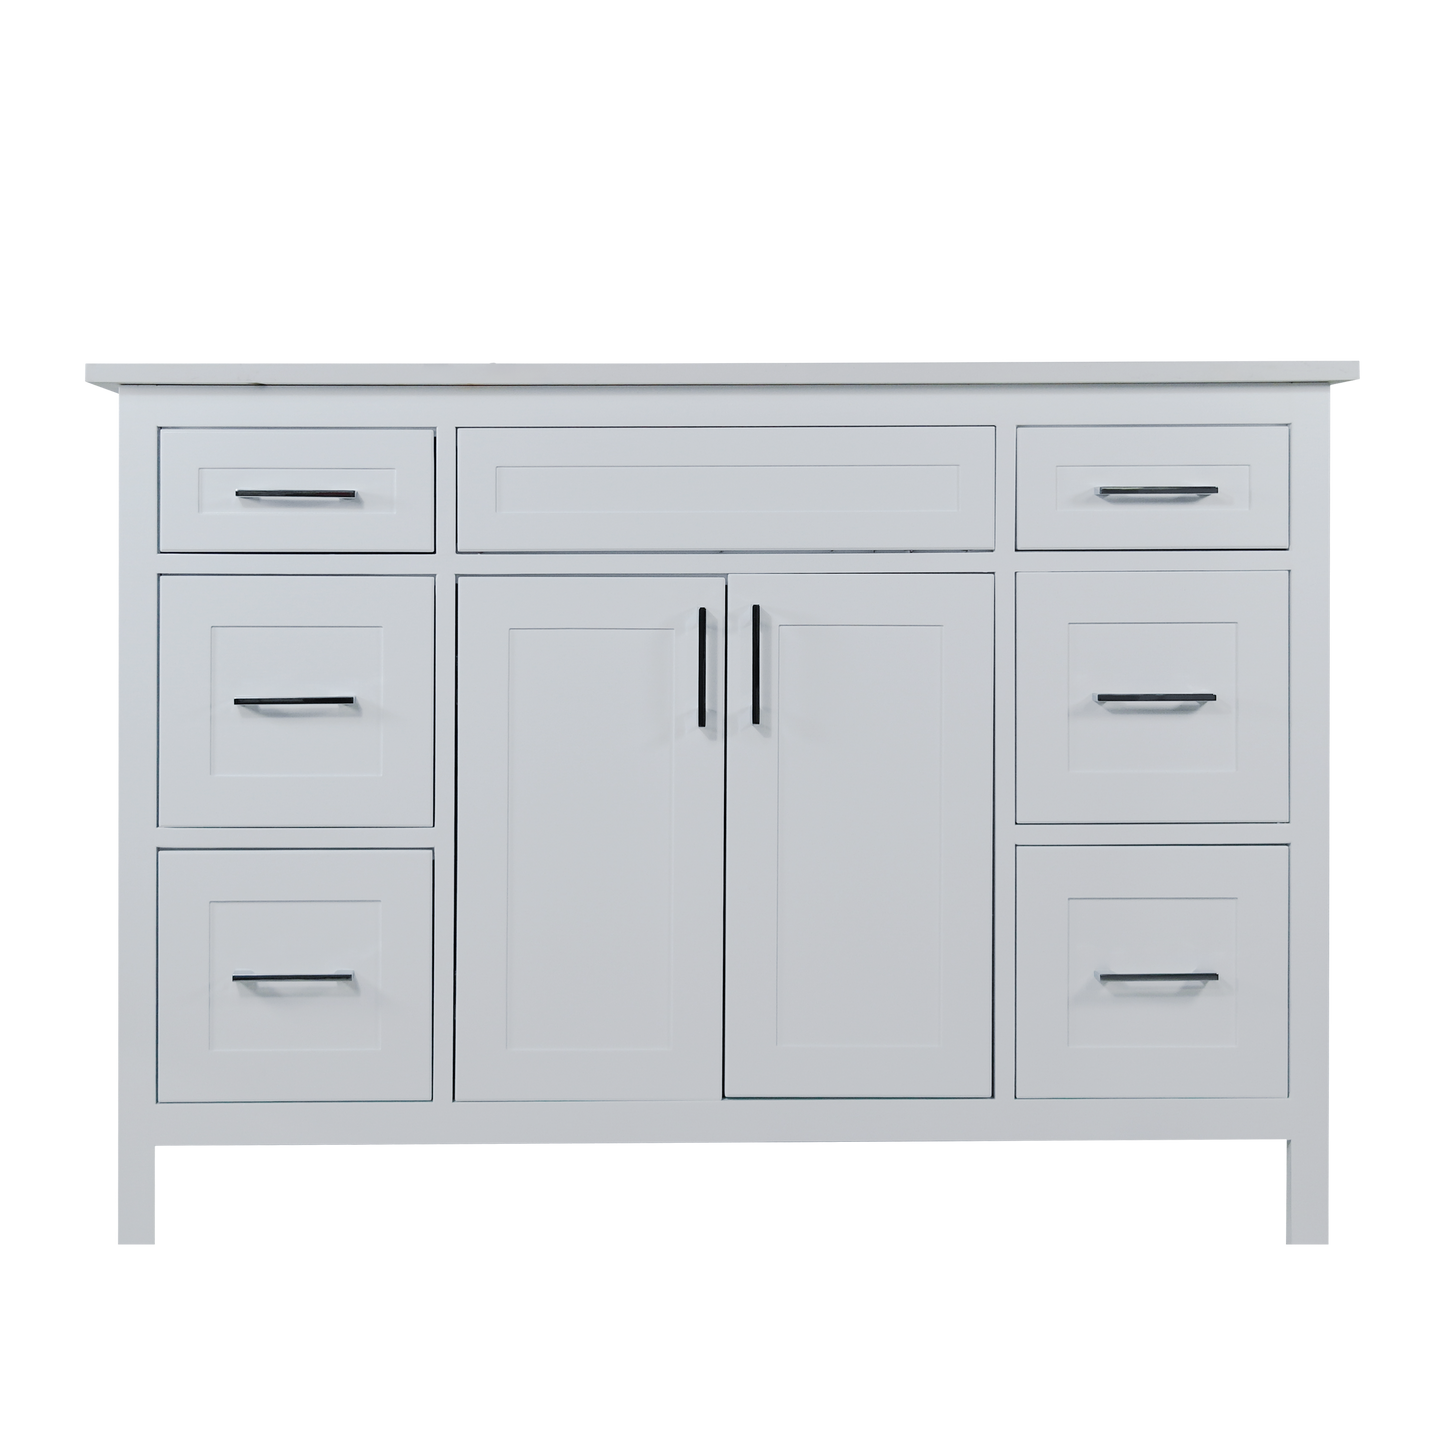 48" Perla wood vanity white shaker style with 6 drawers made in Canada